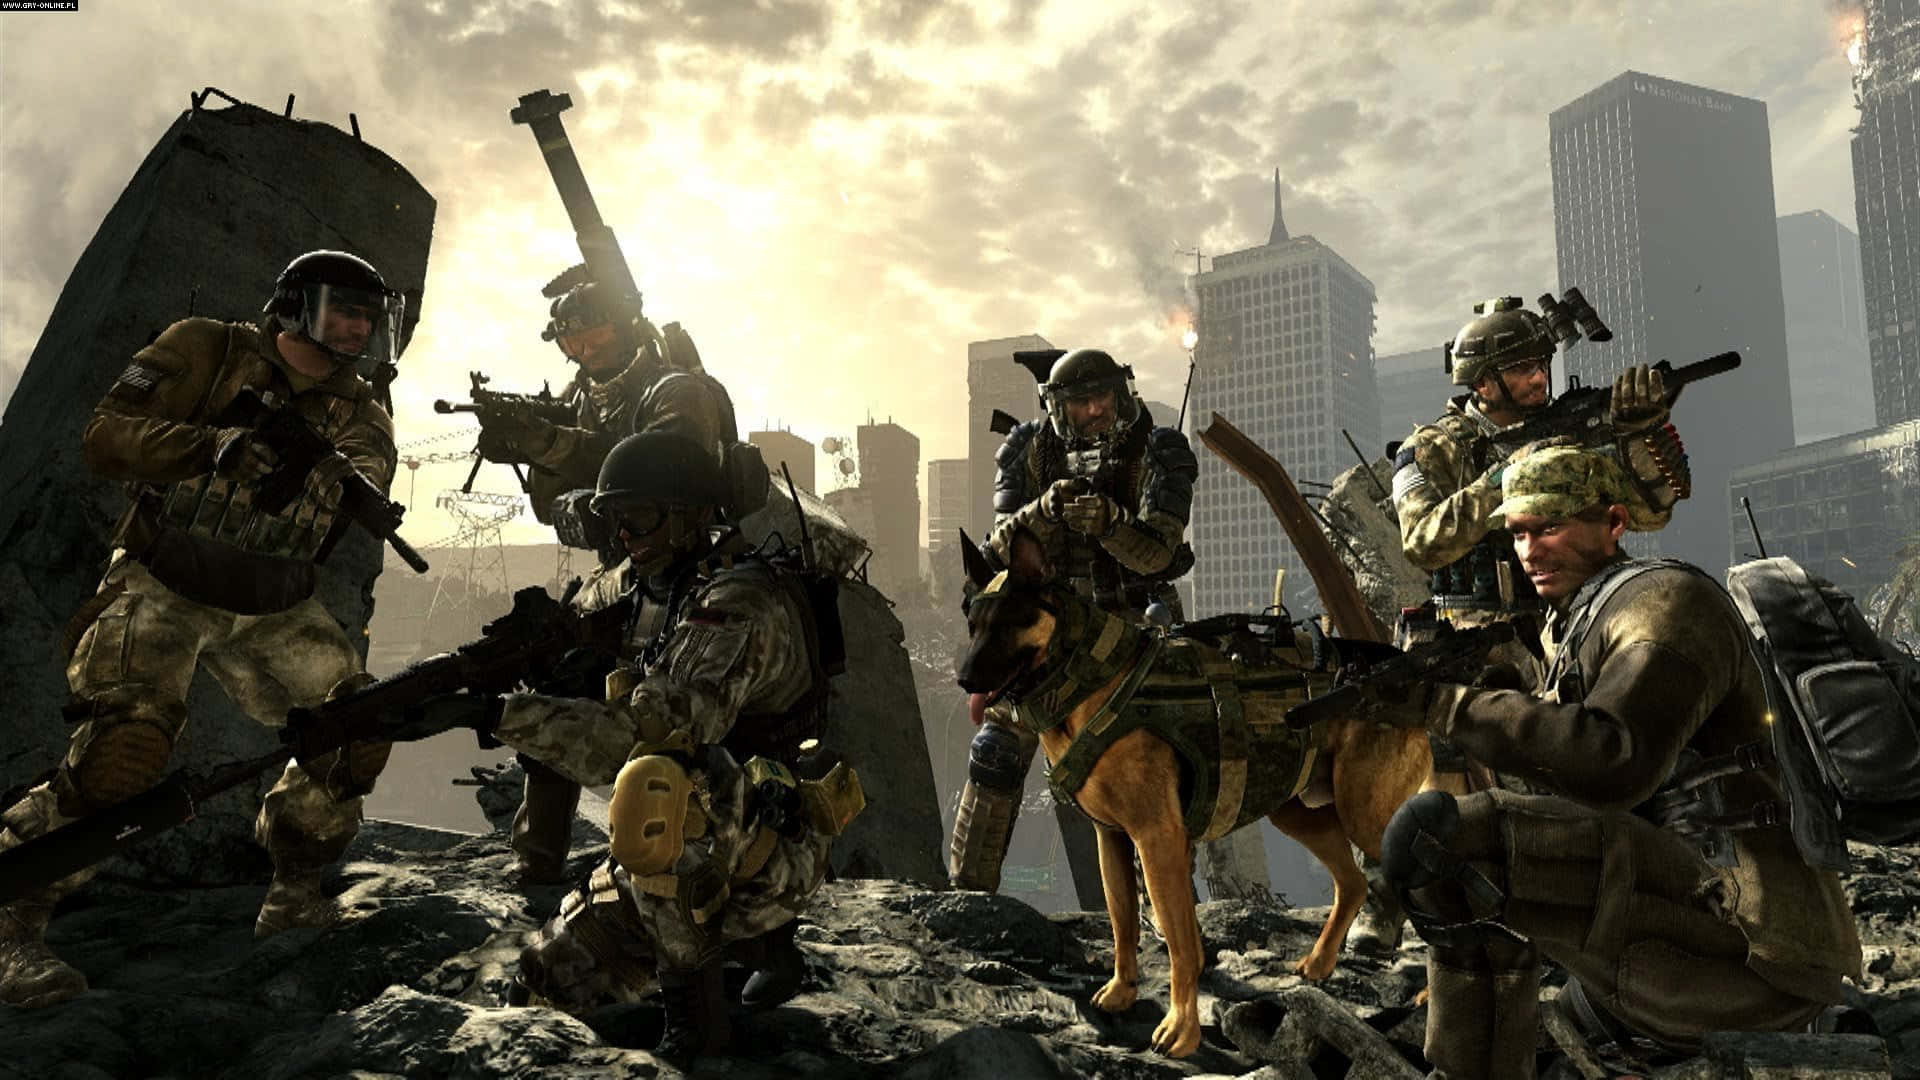 Intense Call of Duty: Ghosts action scene Wallpaper